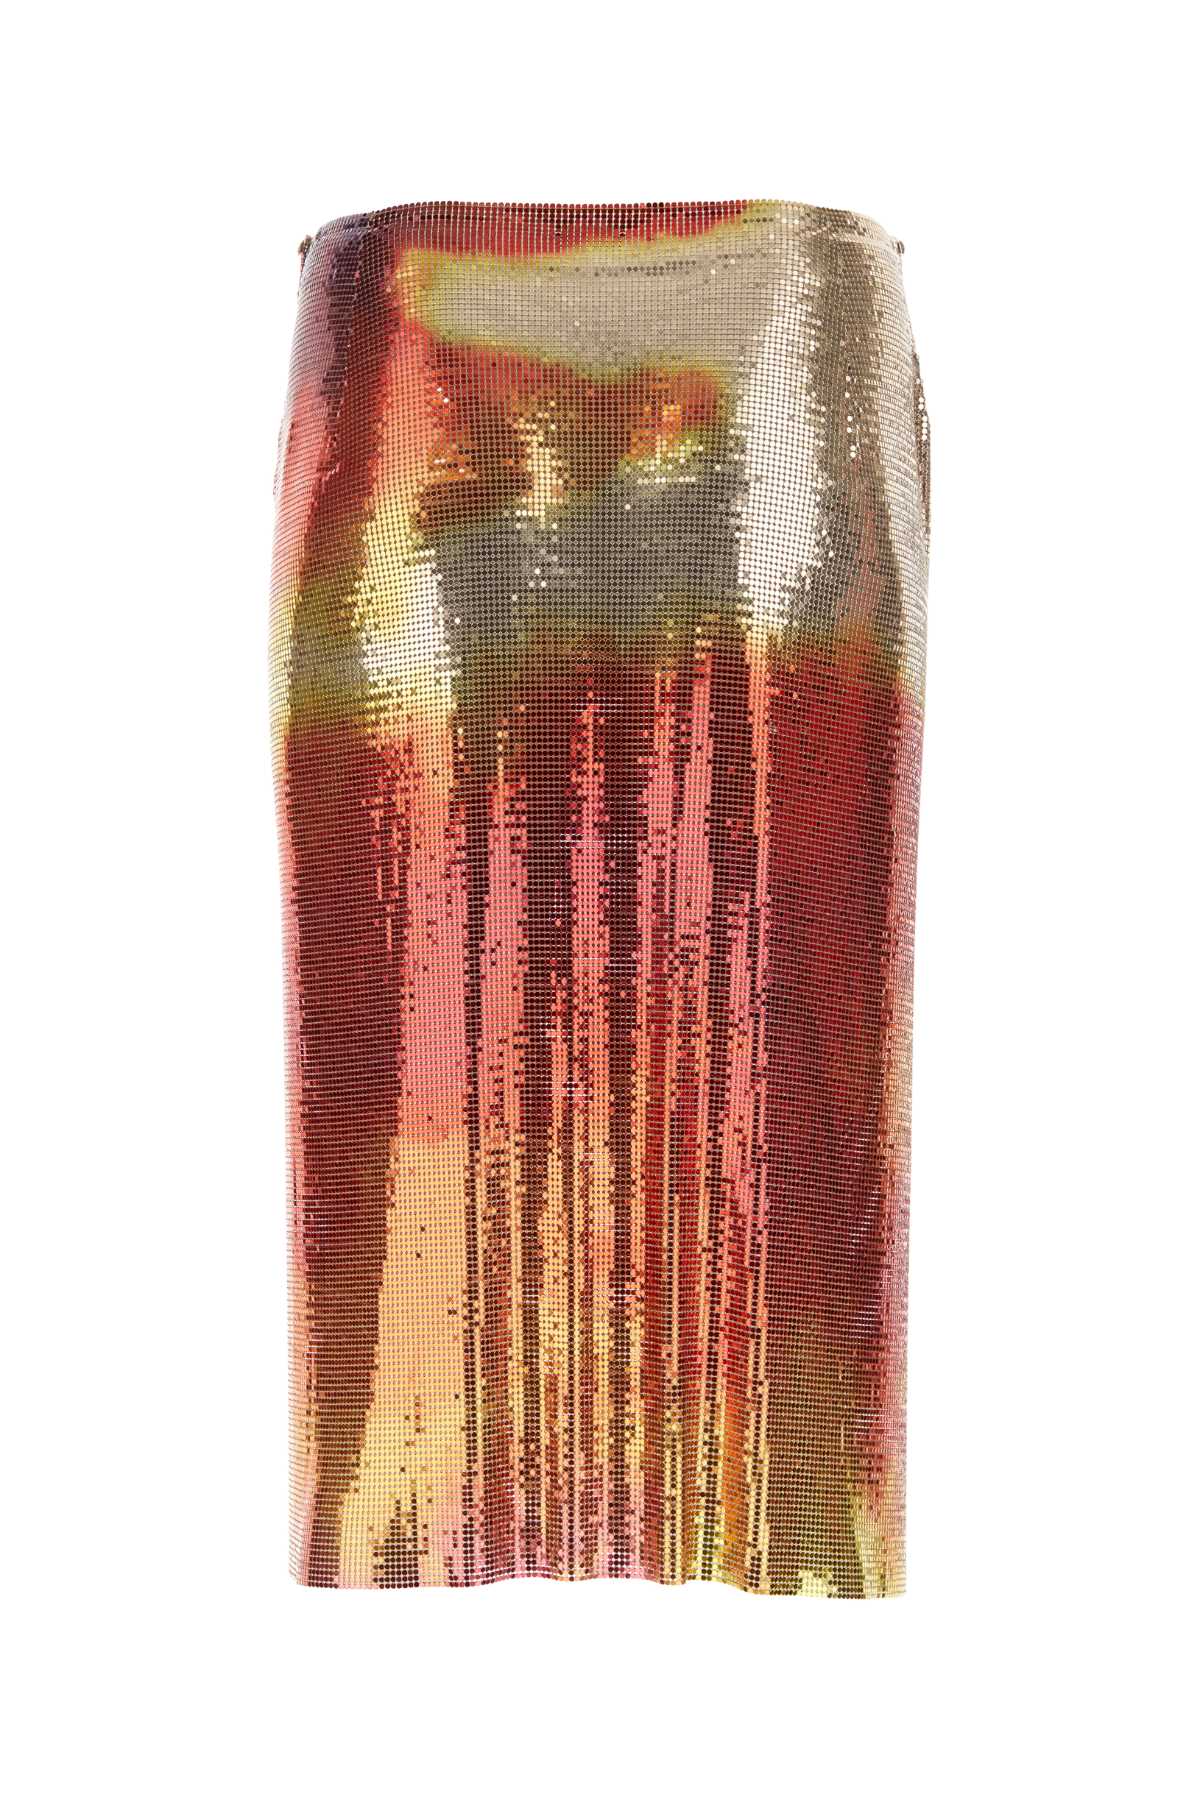 Paco Rabanne Multicolor Chain Mail Skirt In V963